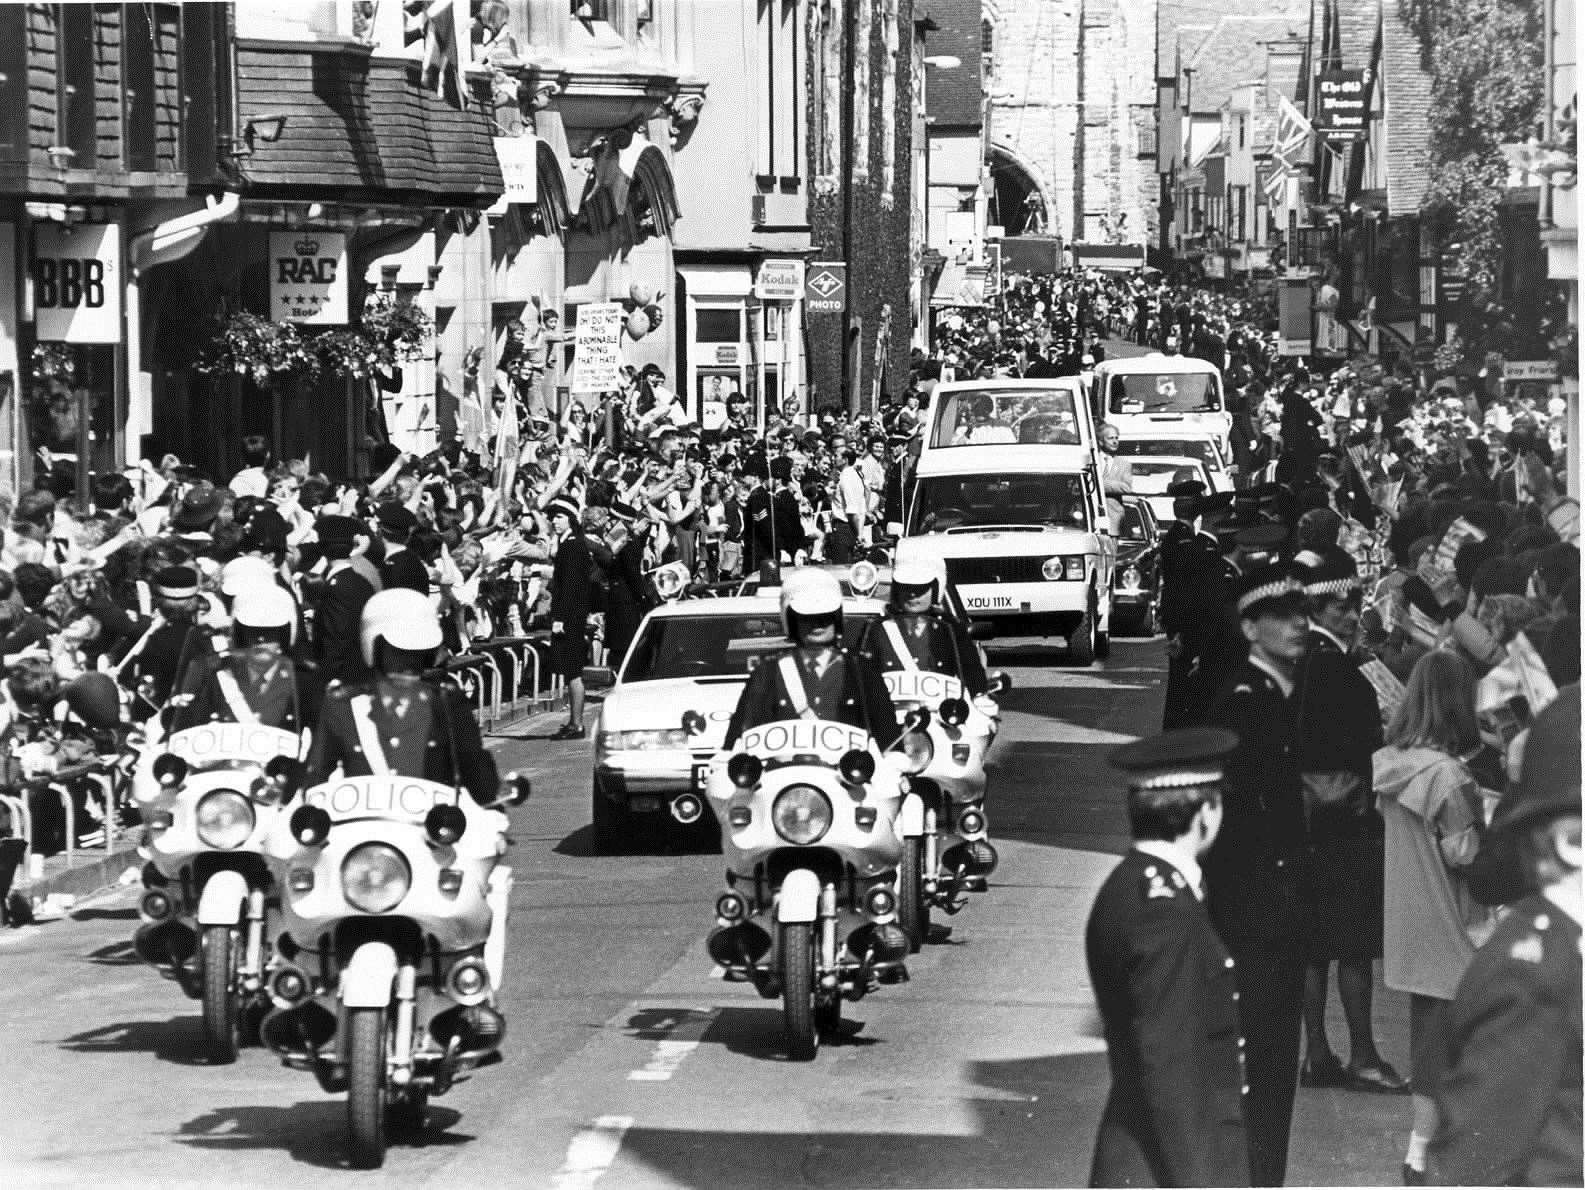 Crowds in their thousands lined the streets of Canterbury to greet the Pope, who travelled in his Popemobile in May 1982